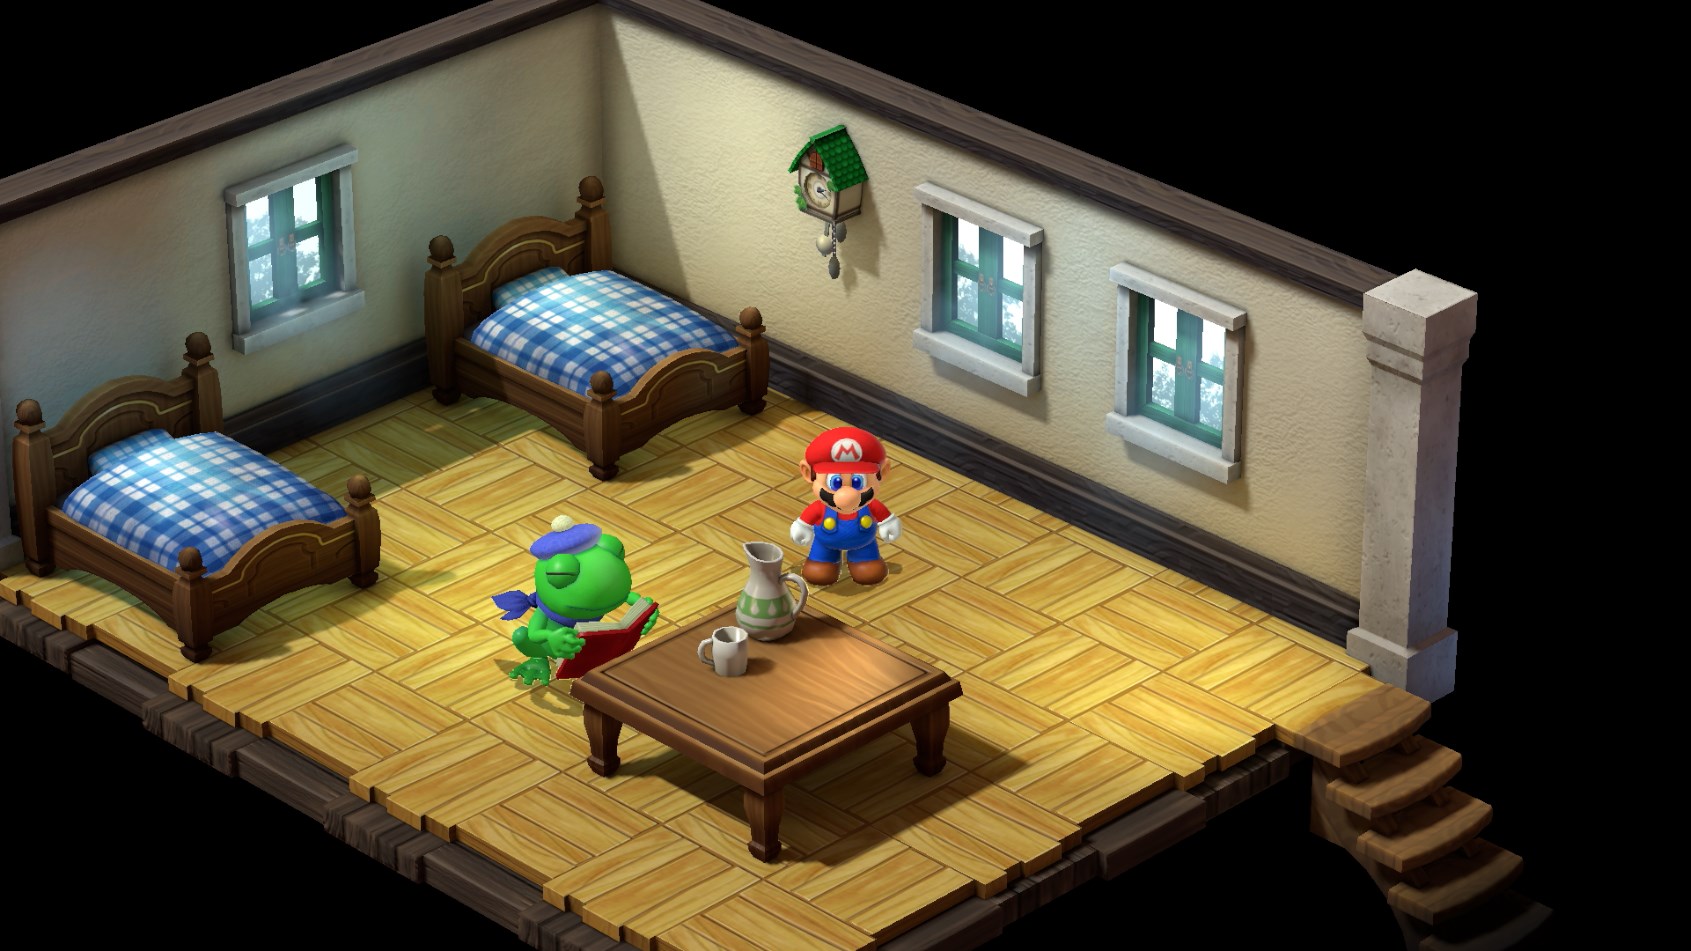 Mario stands near a frog in Super Mario RPG.